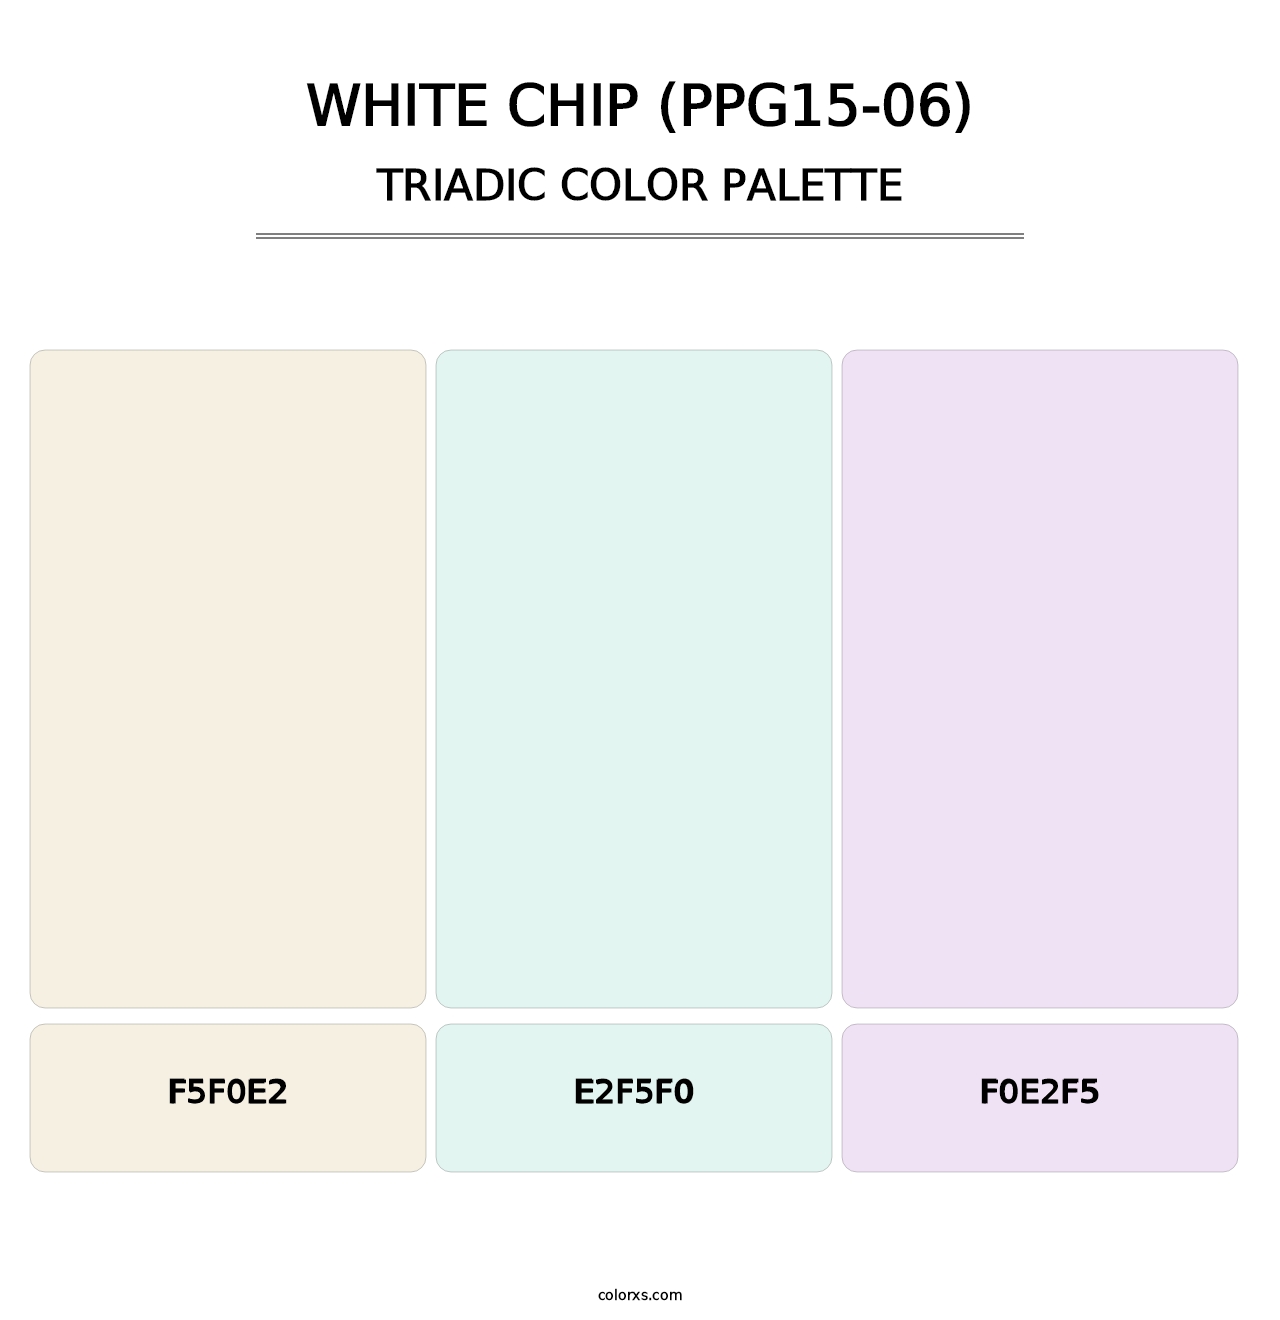 White Chip (PPG15-06) - Triadic Color Palette